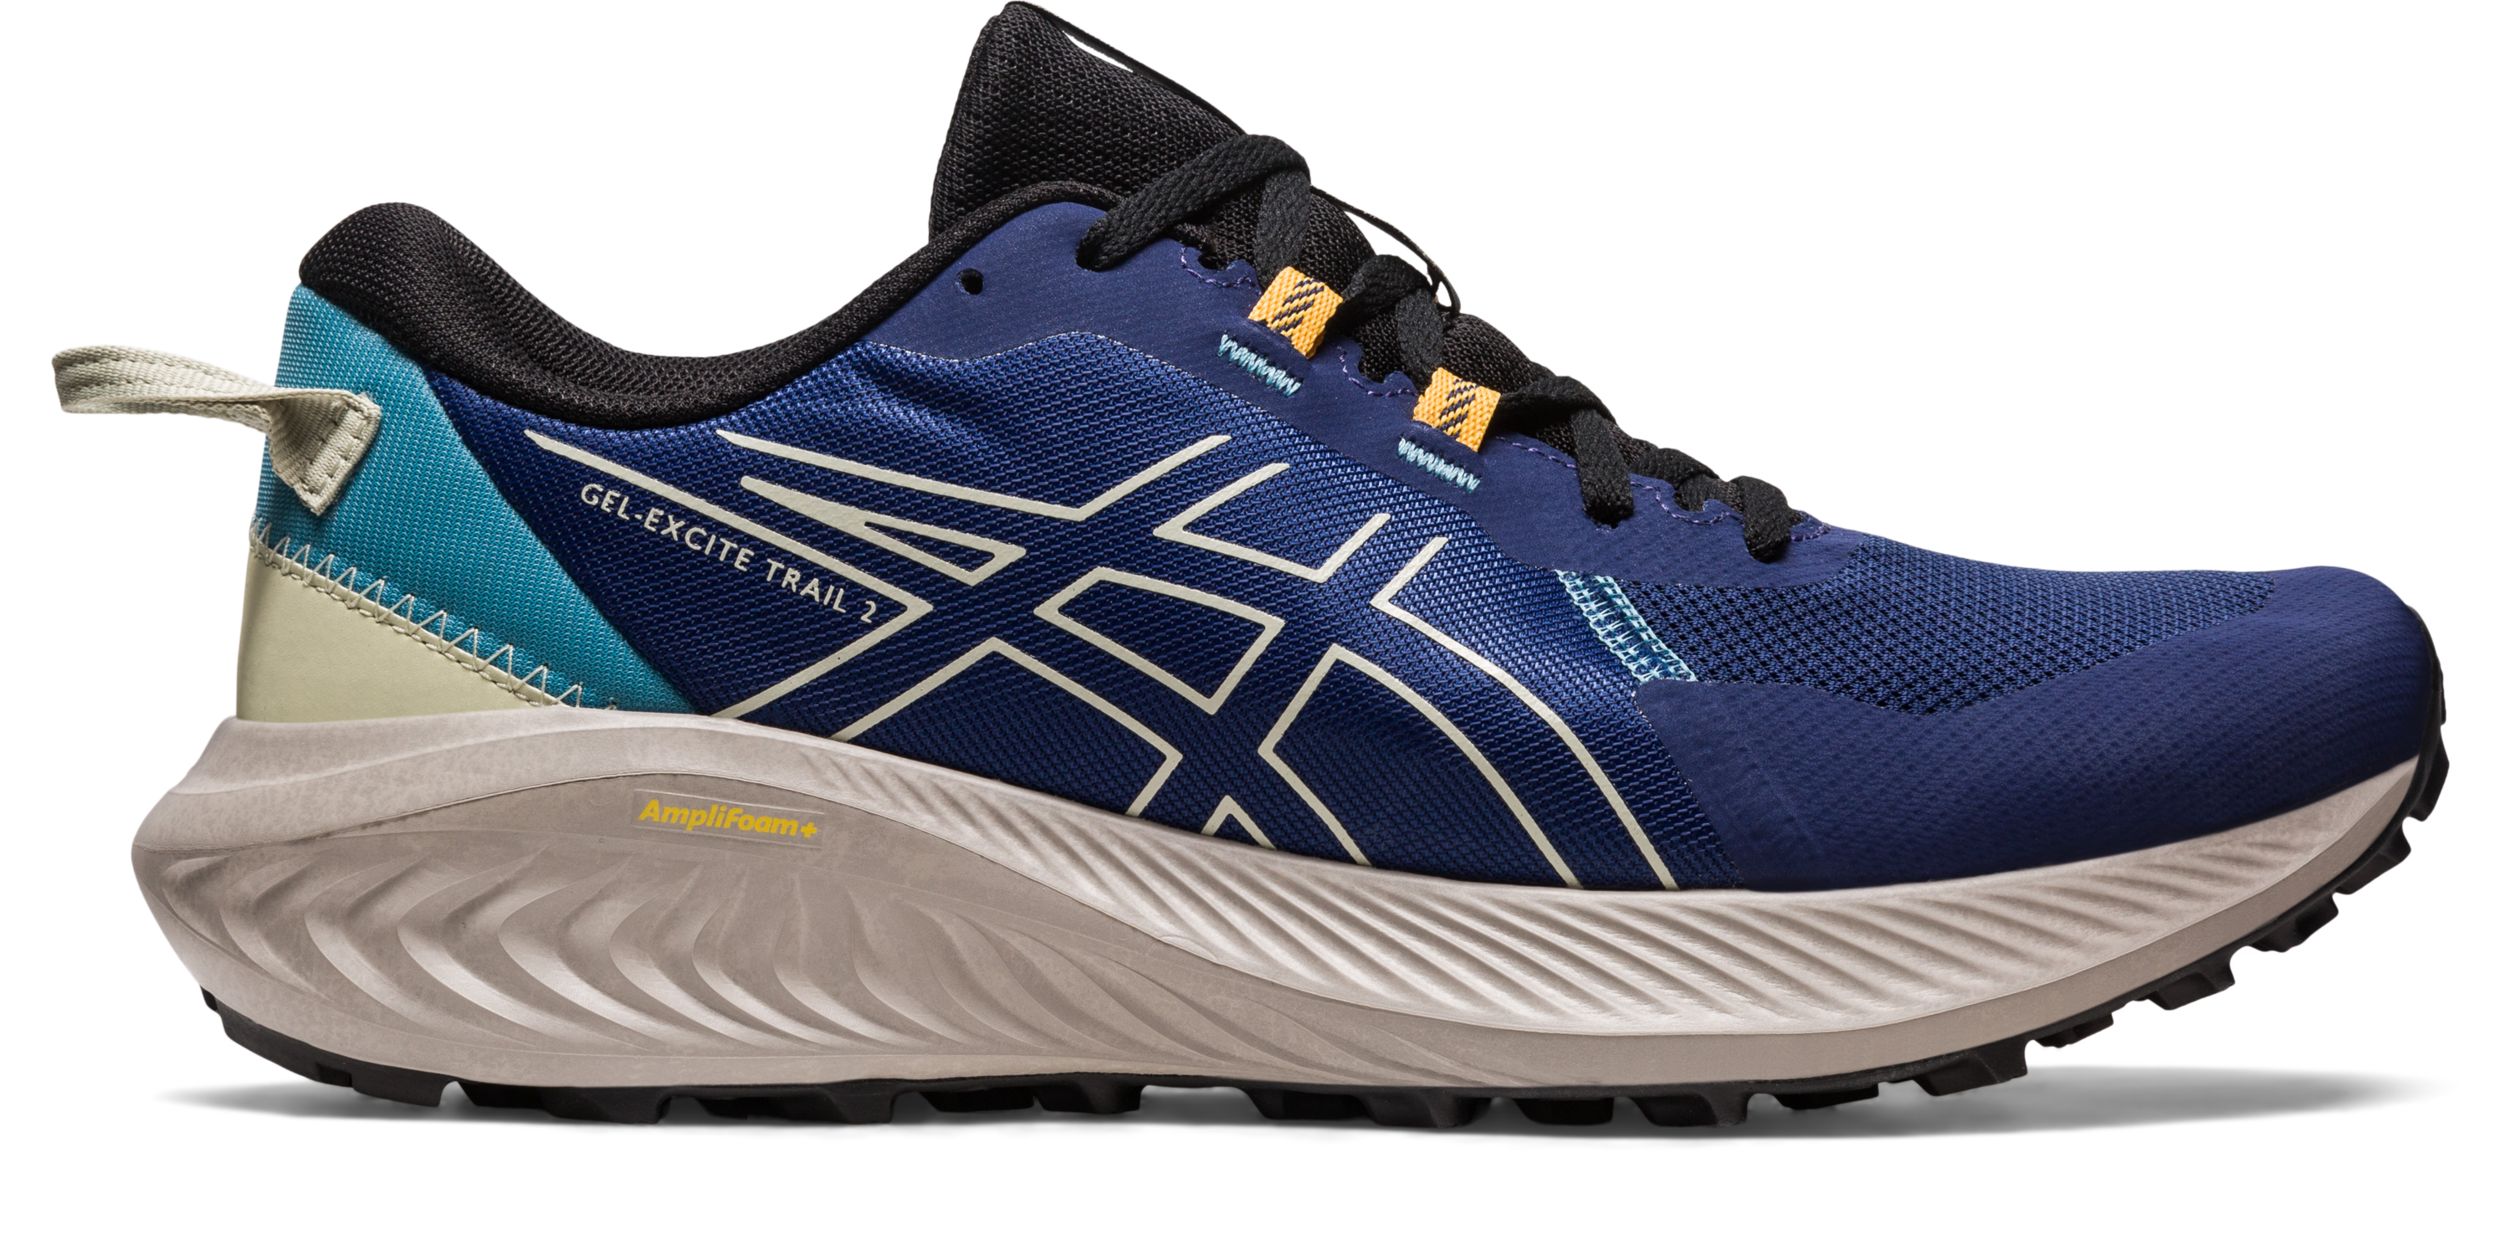 Image of Asics Men's Gel-Excite Trail Running Shoes